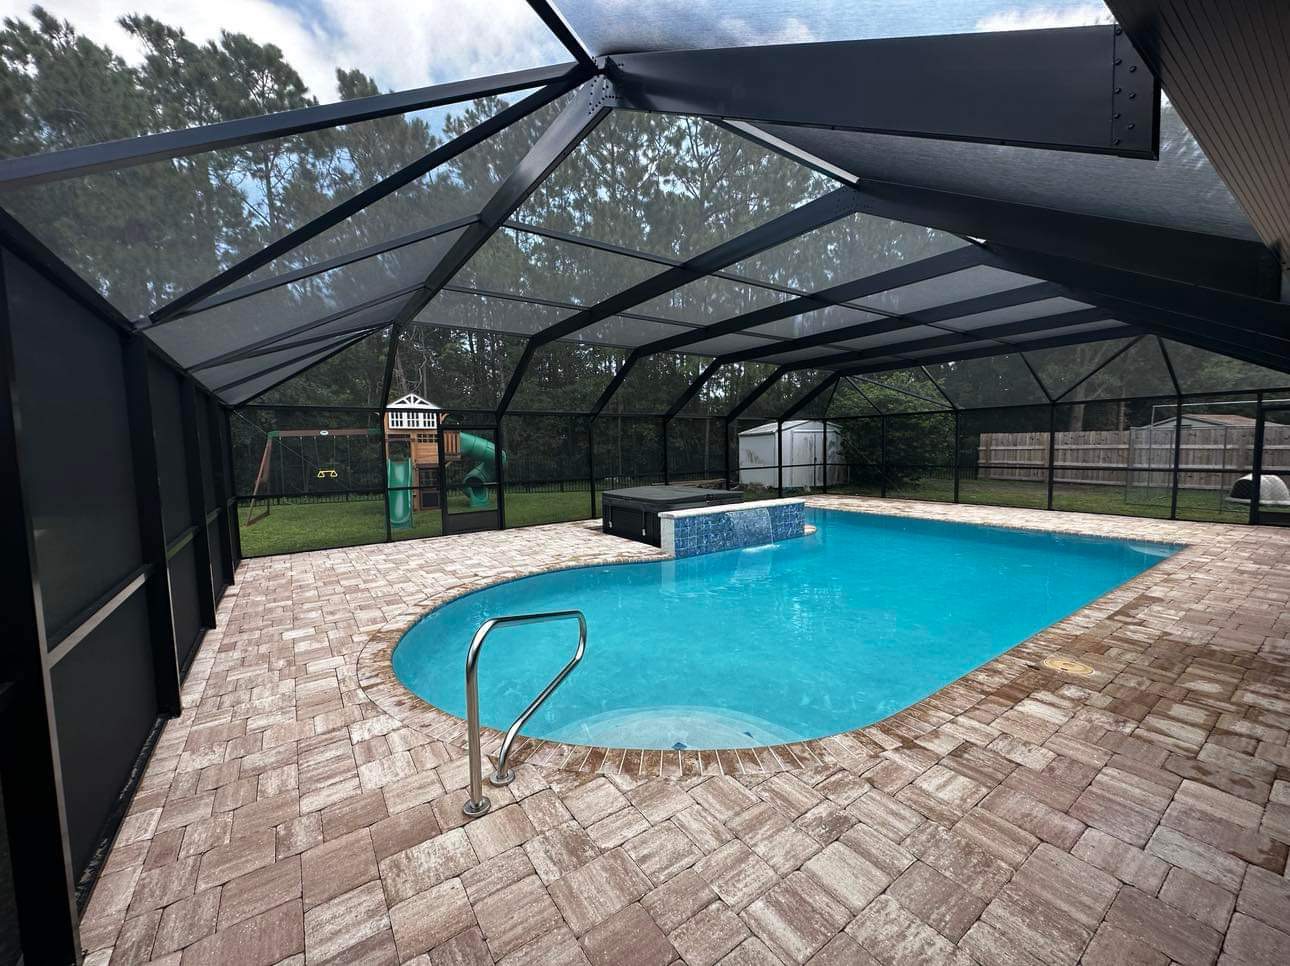 This beautiful swimming pool enclosure was designed and built by Screen enclosures and more in Jacksonville FL.